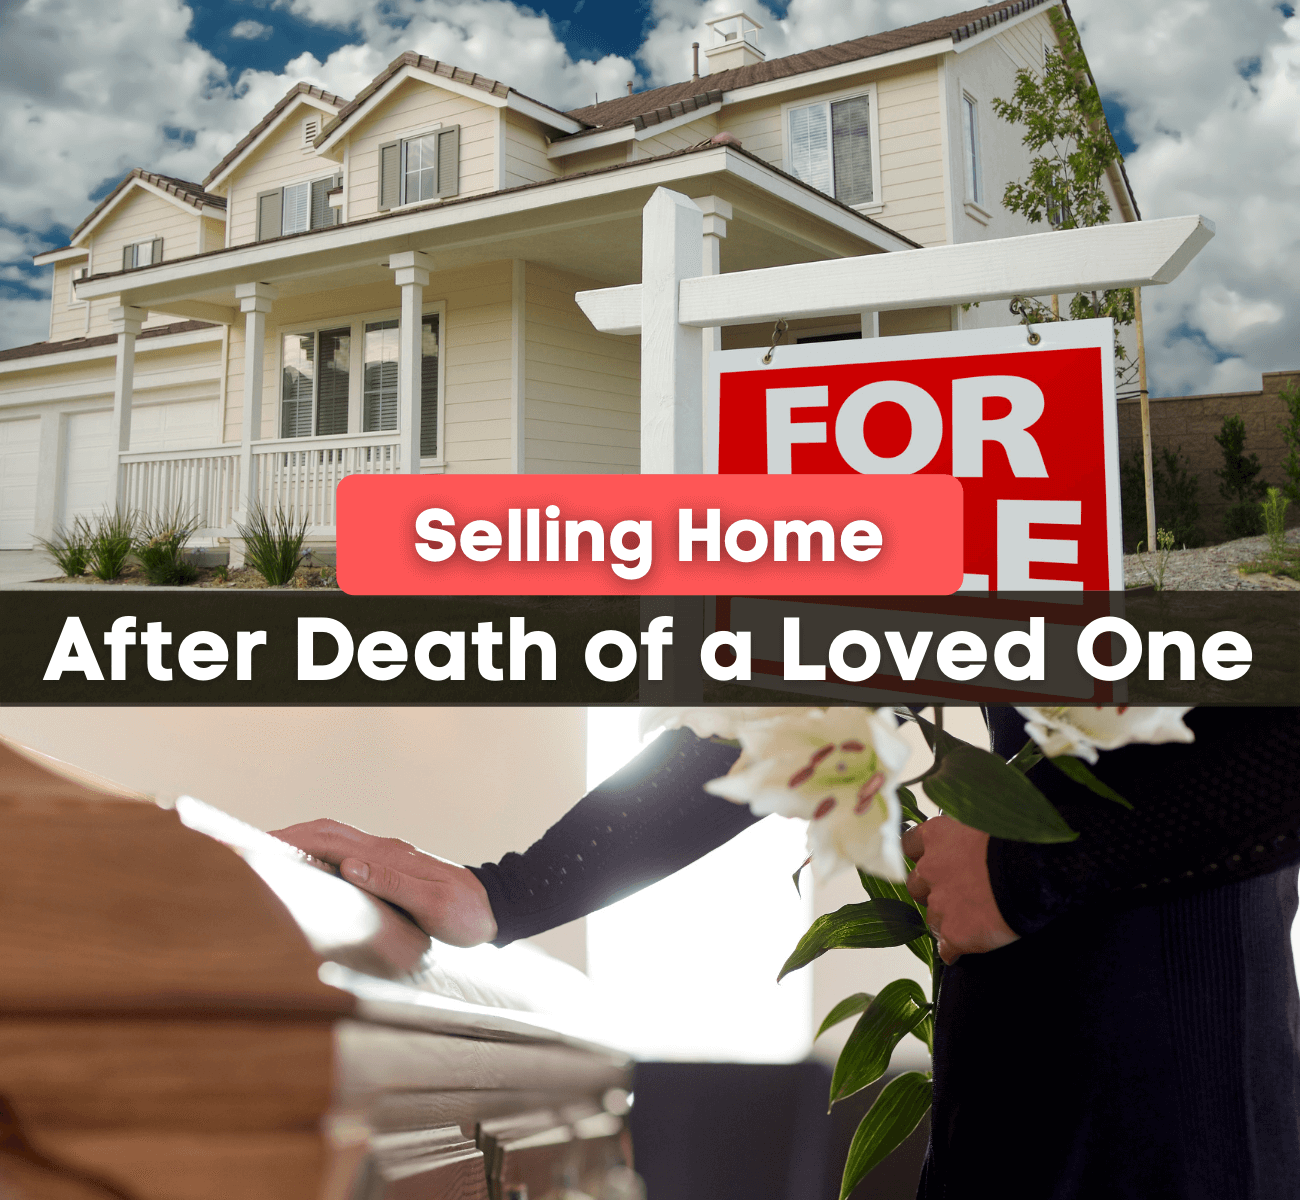 Selling a home after the death of a loved one with a funeral taking place and a for sale sign in front of a house